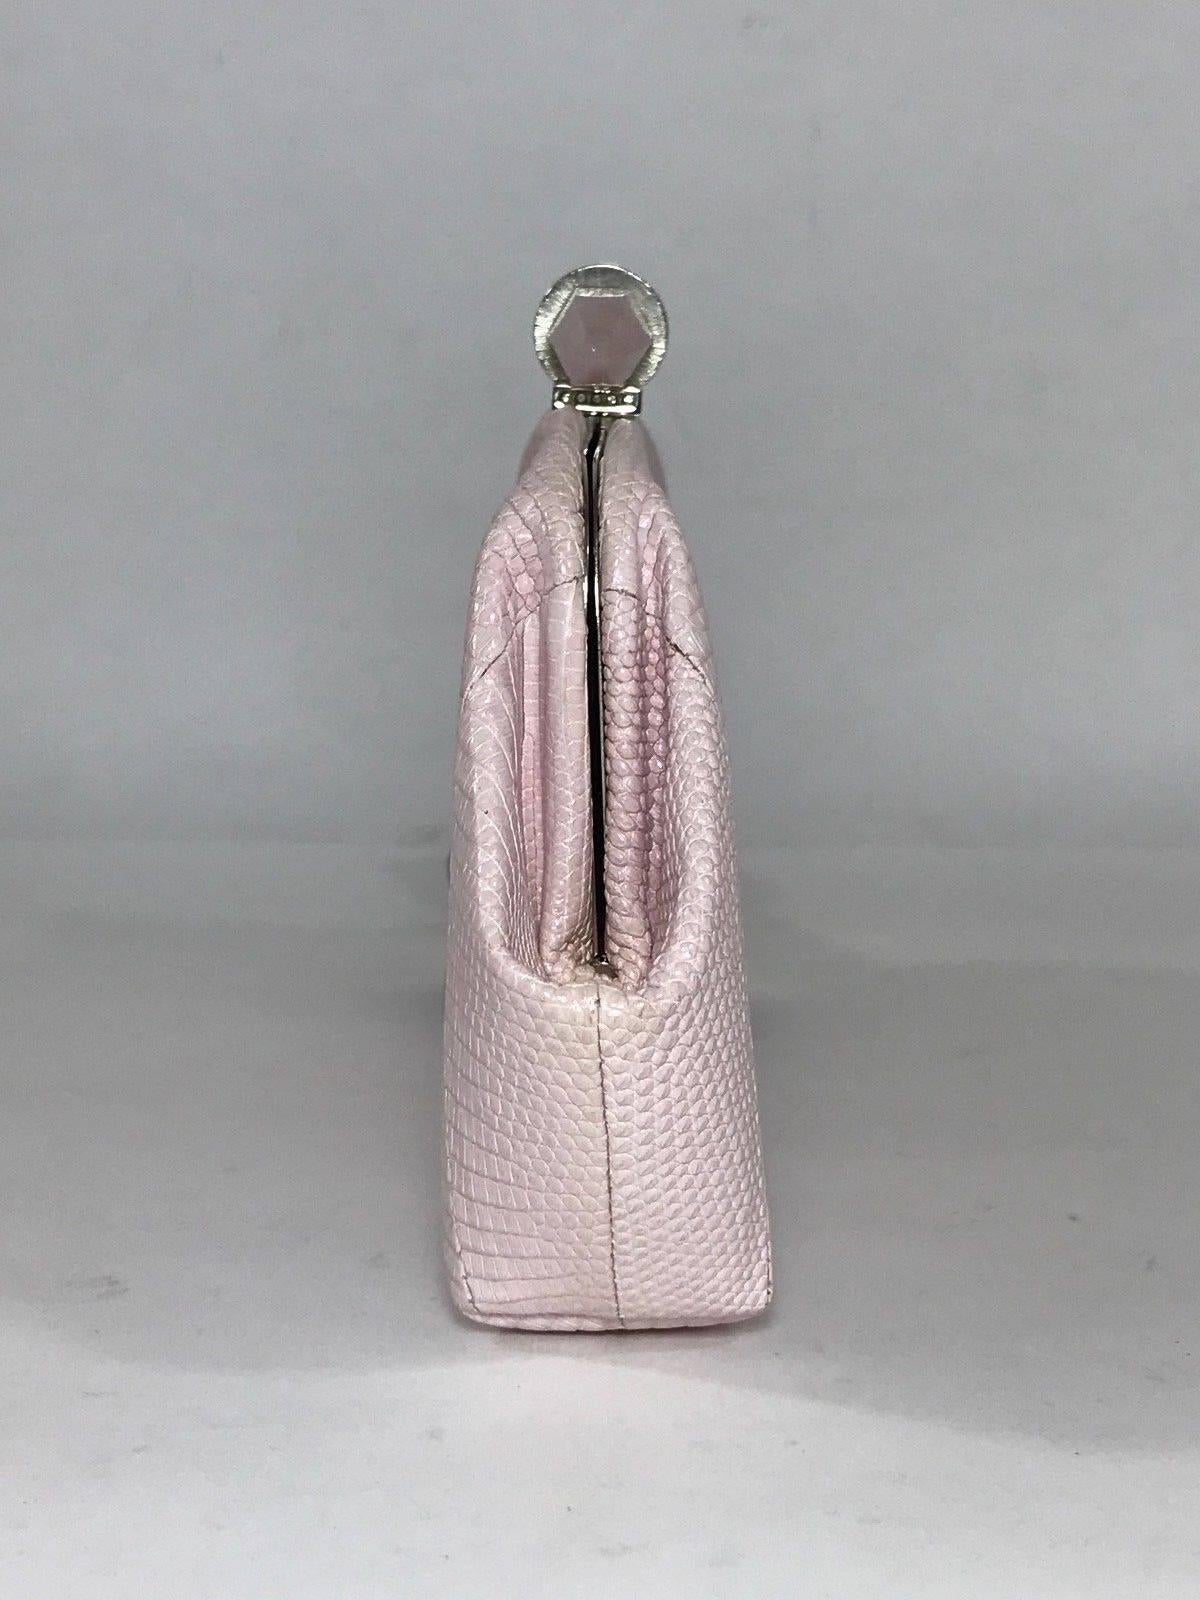 Judith Leiber Lizard Skin Pink Clutch In Excellent Condition For Sale In Saint Charles, IL